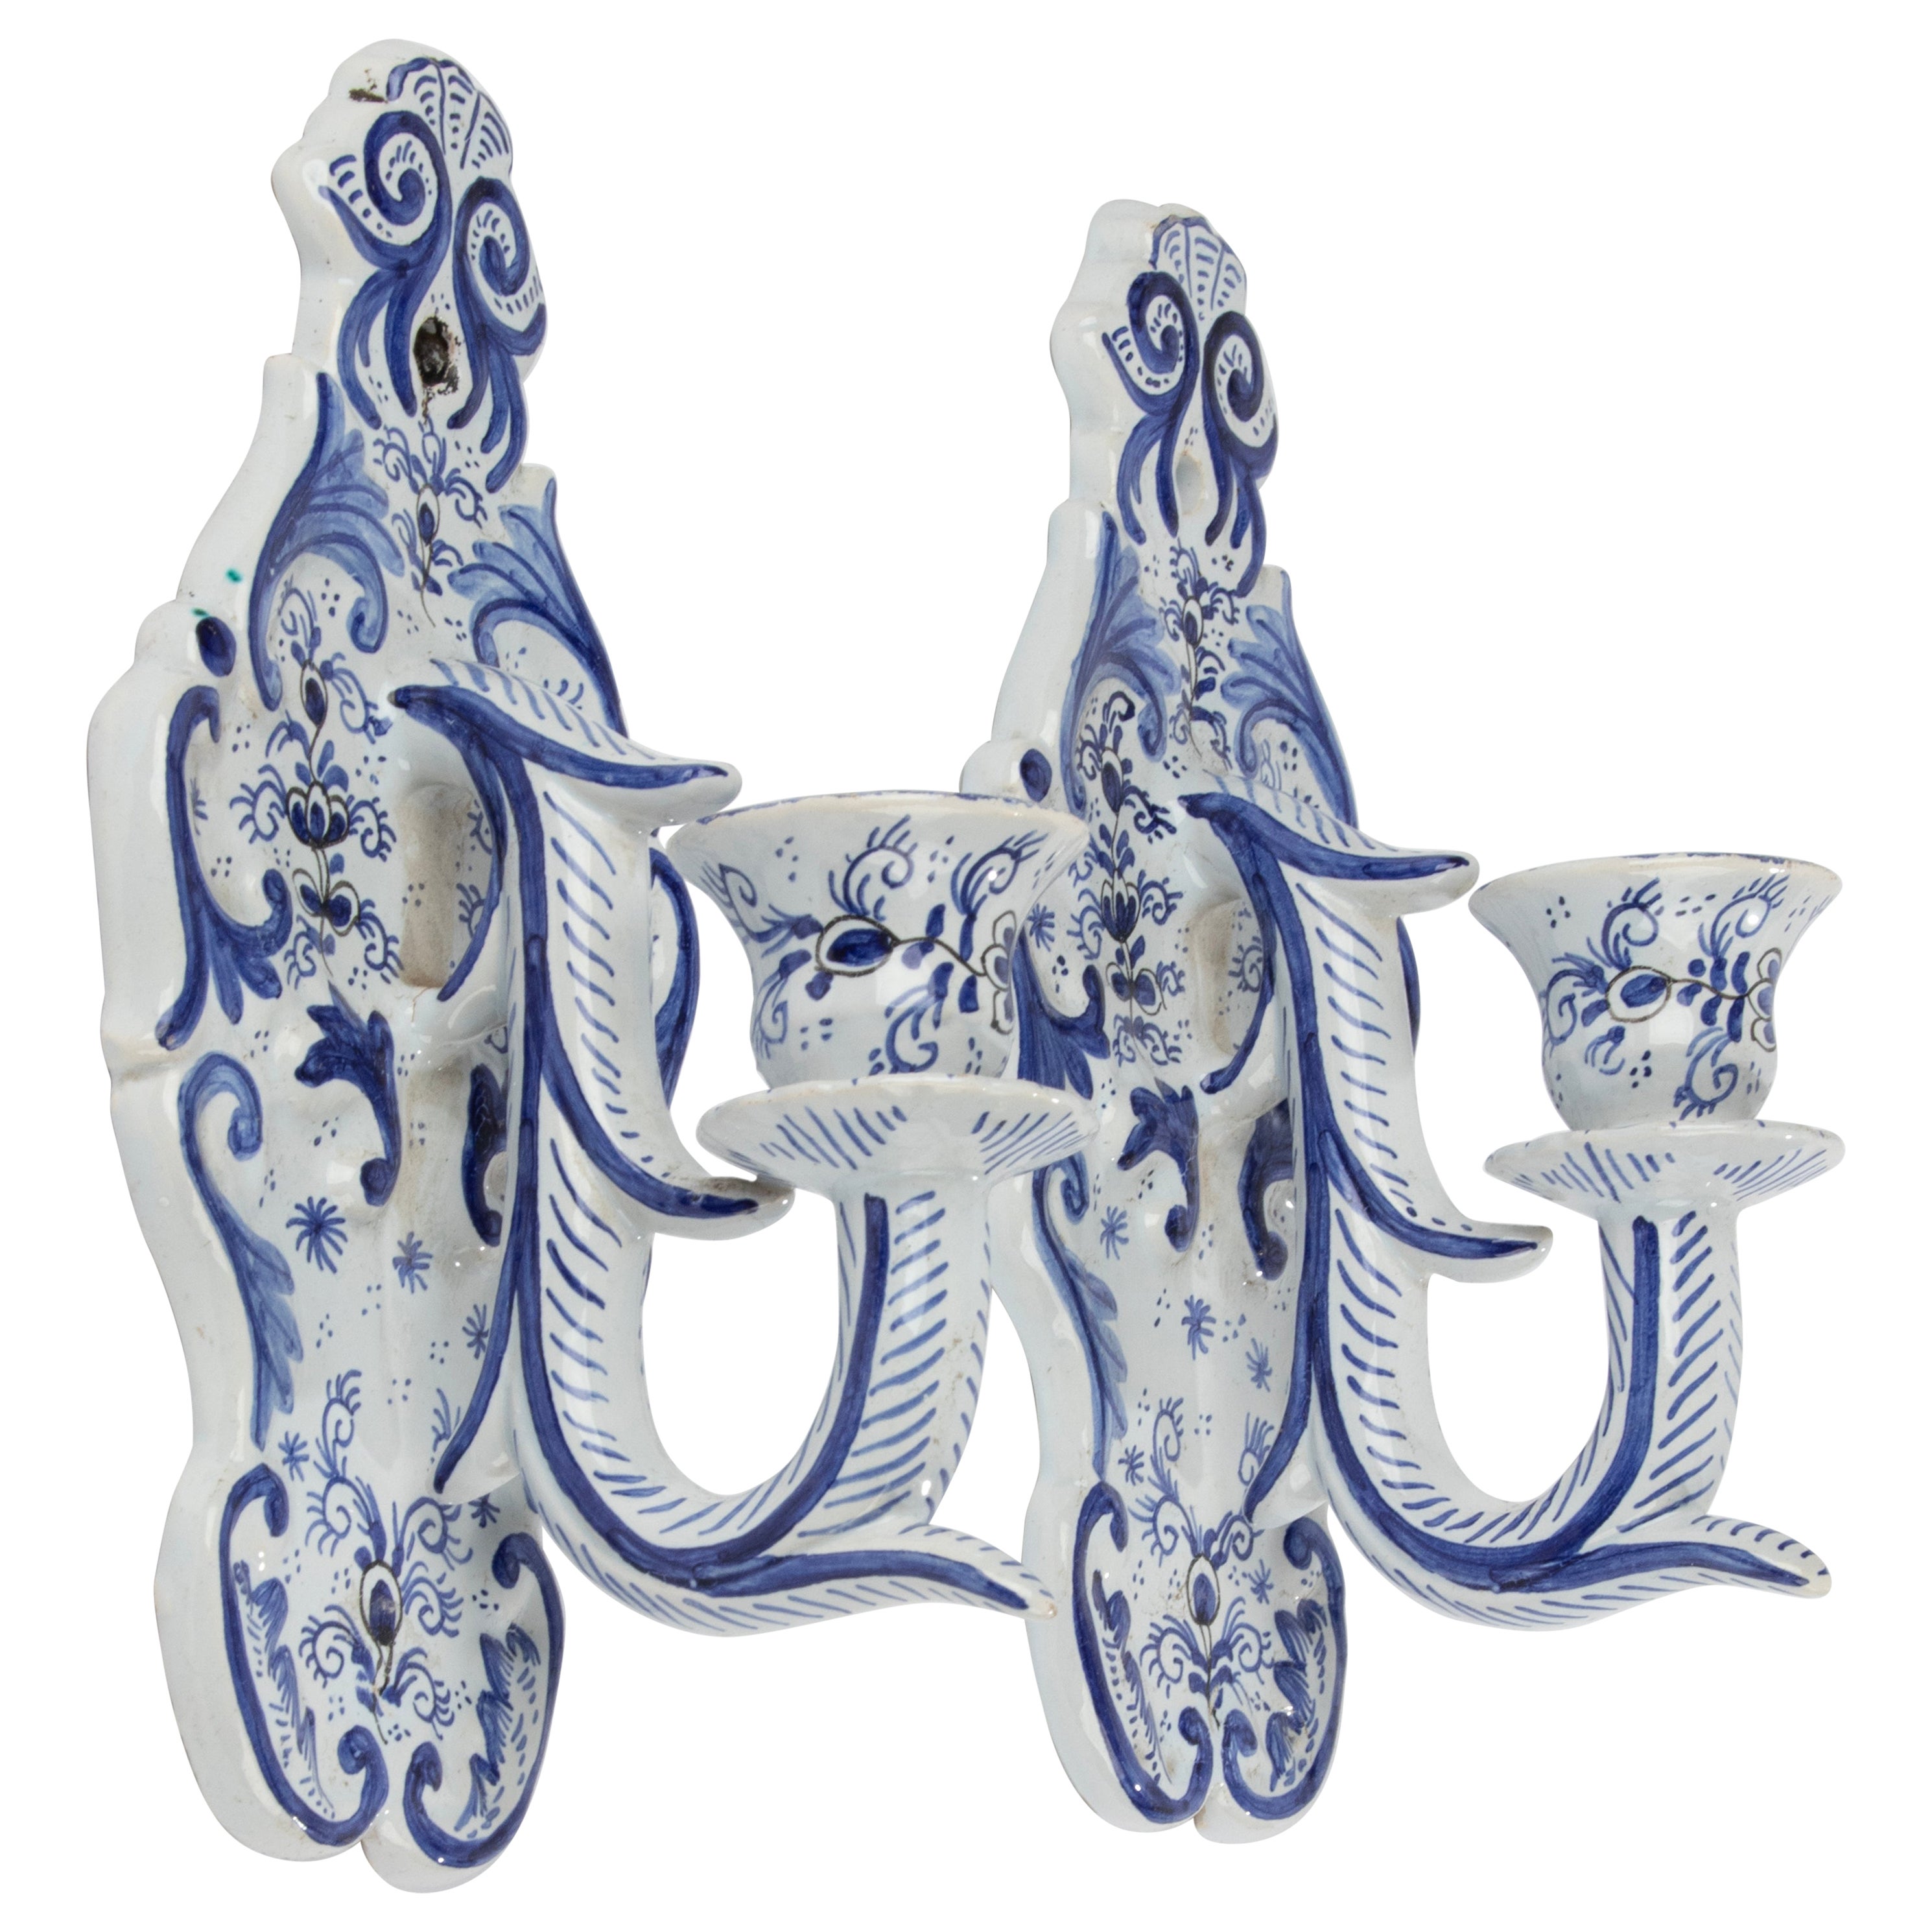 A Pair of Early 20th Century Delft Faïence Hand Painted Wall Candles For Sale